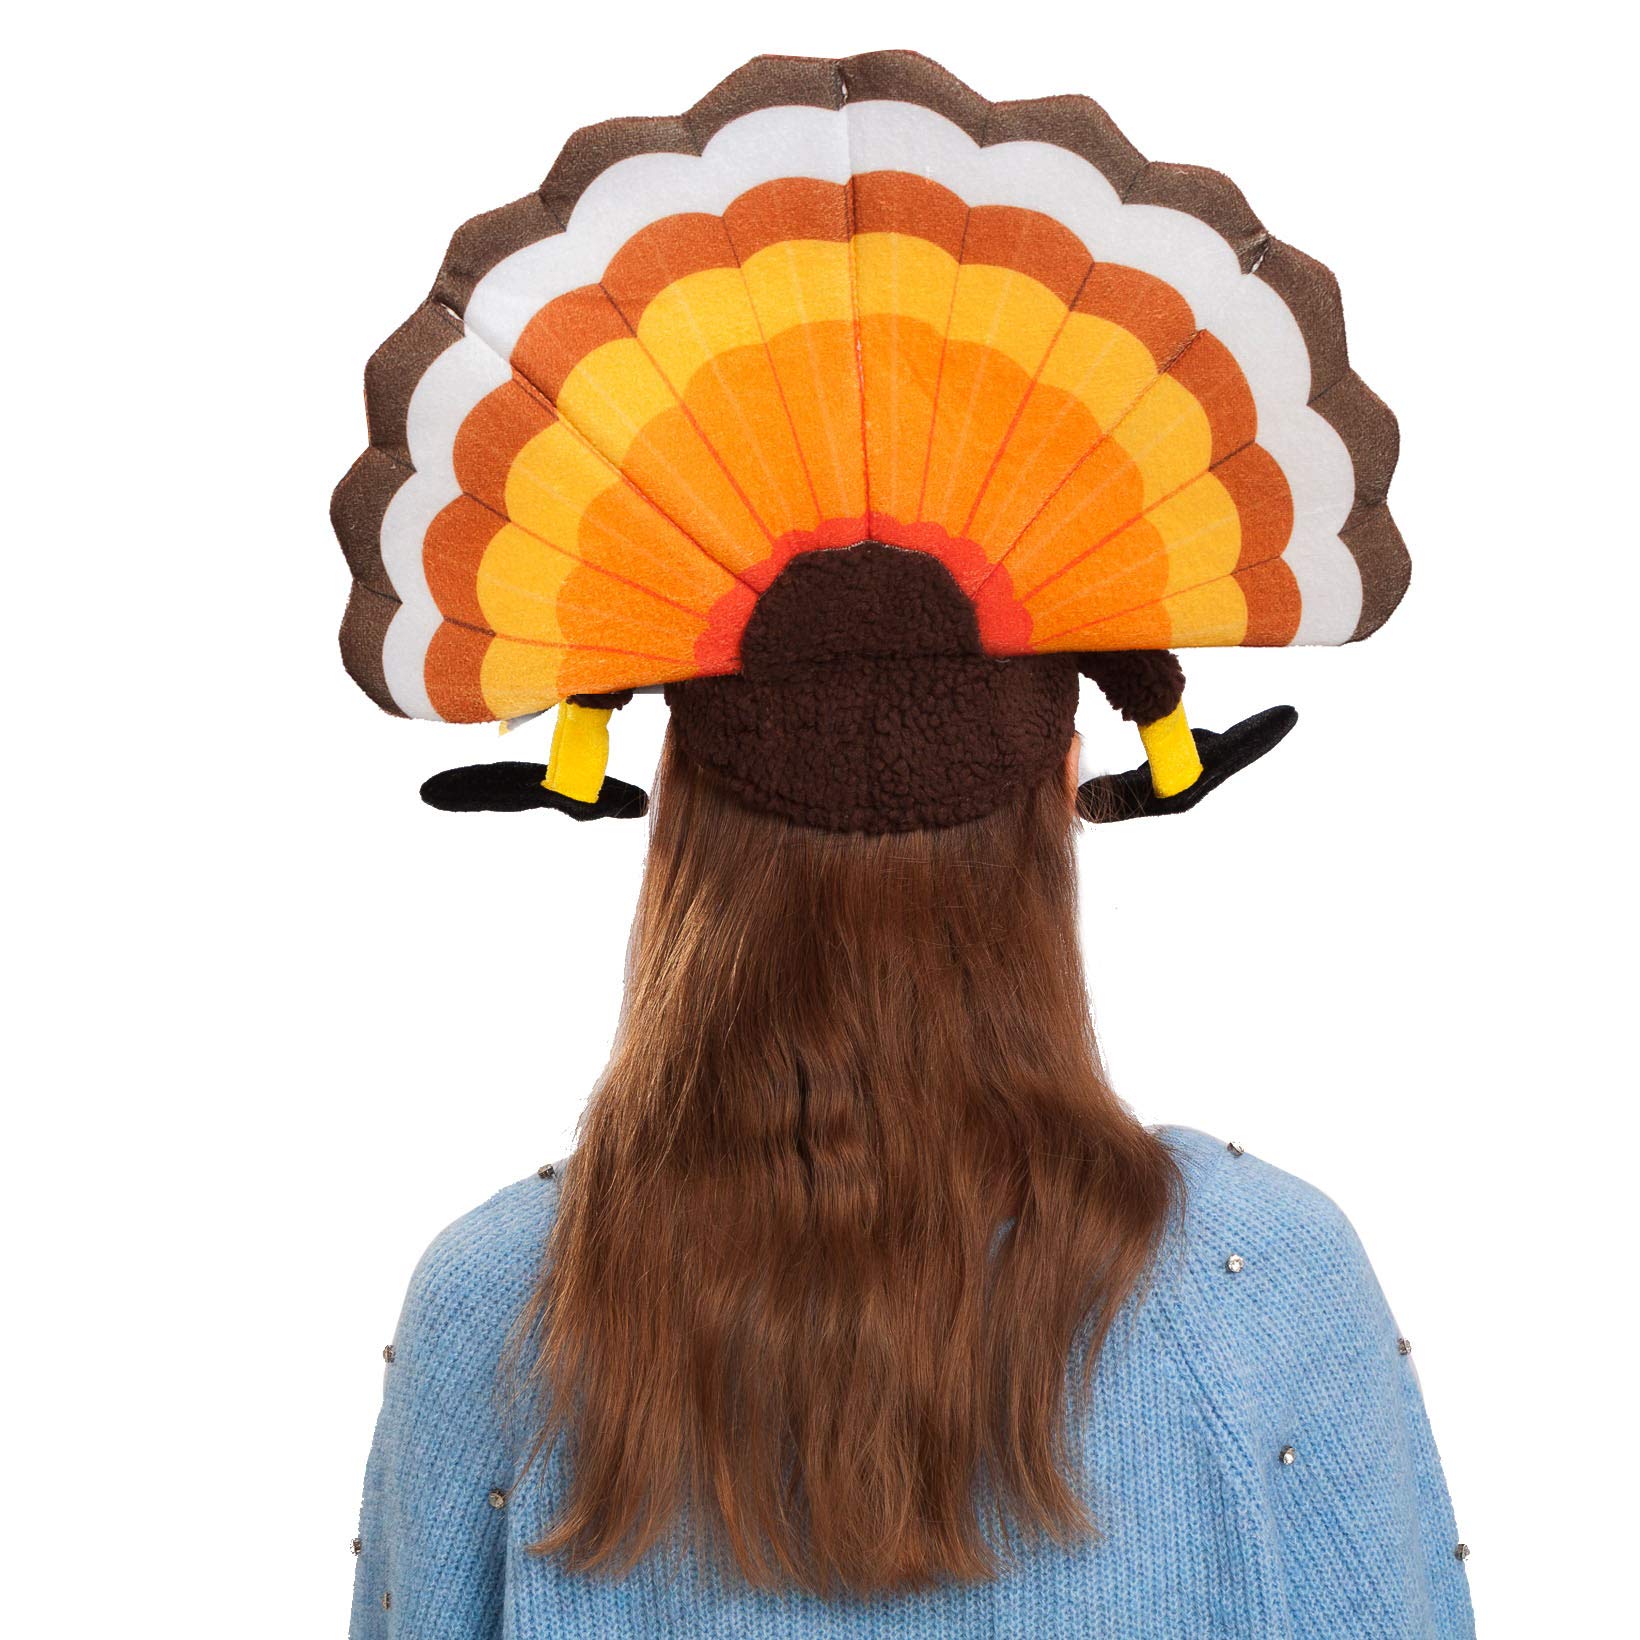 Spooktacular 2 Pack Thanksgiving Turkey Hats Turkey Cap for Thanksgiving Night Event Dress-up Party Role Play Carnival Cosplay Costume Accessories Multi-colores - image 2 of 7